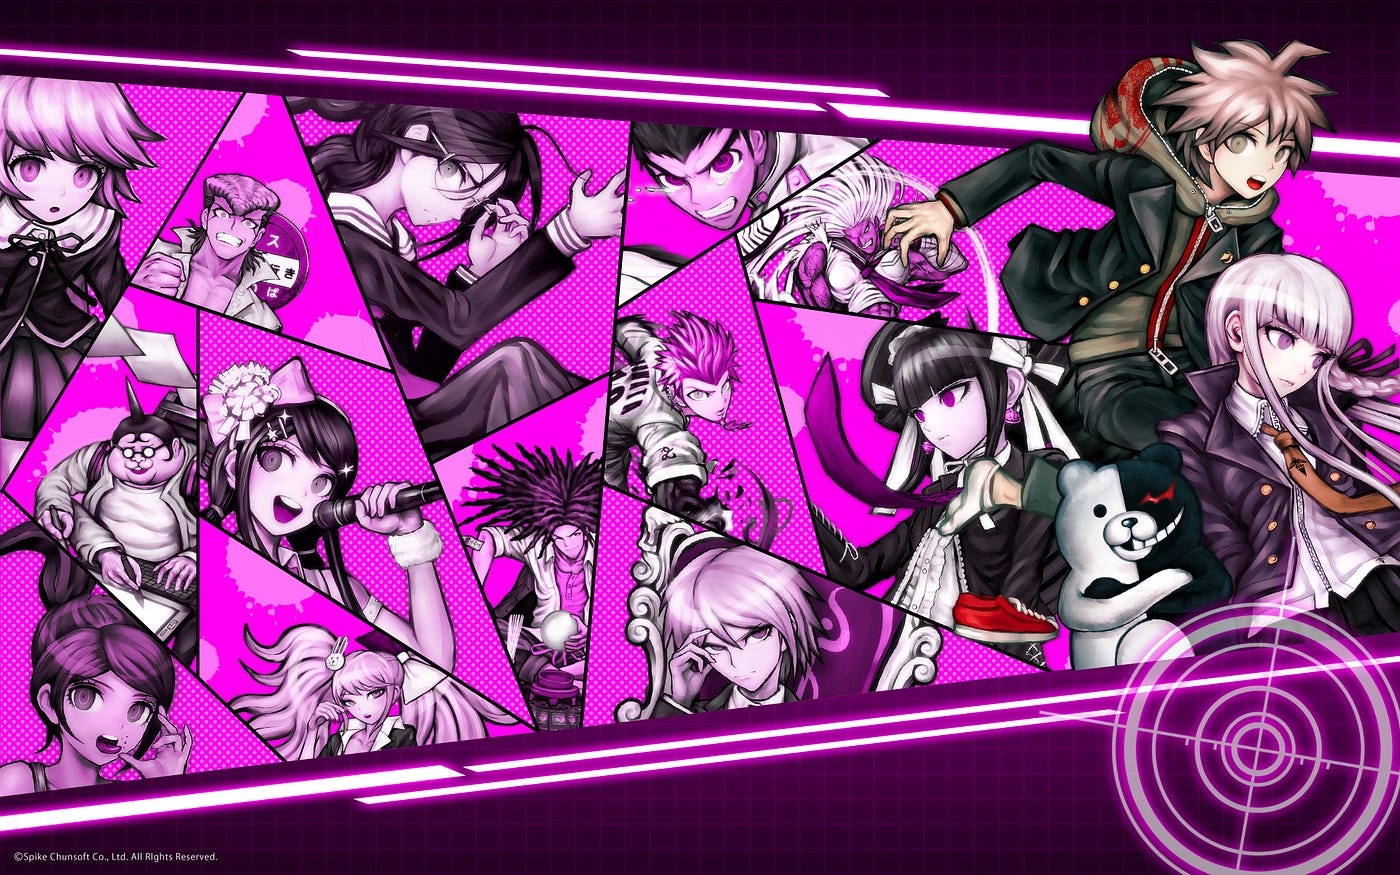 I asked each Danganronpa V3 student about which of the top three